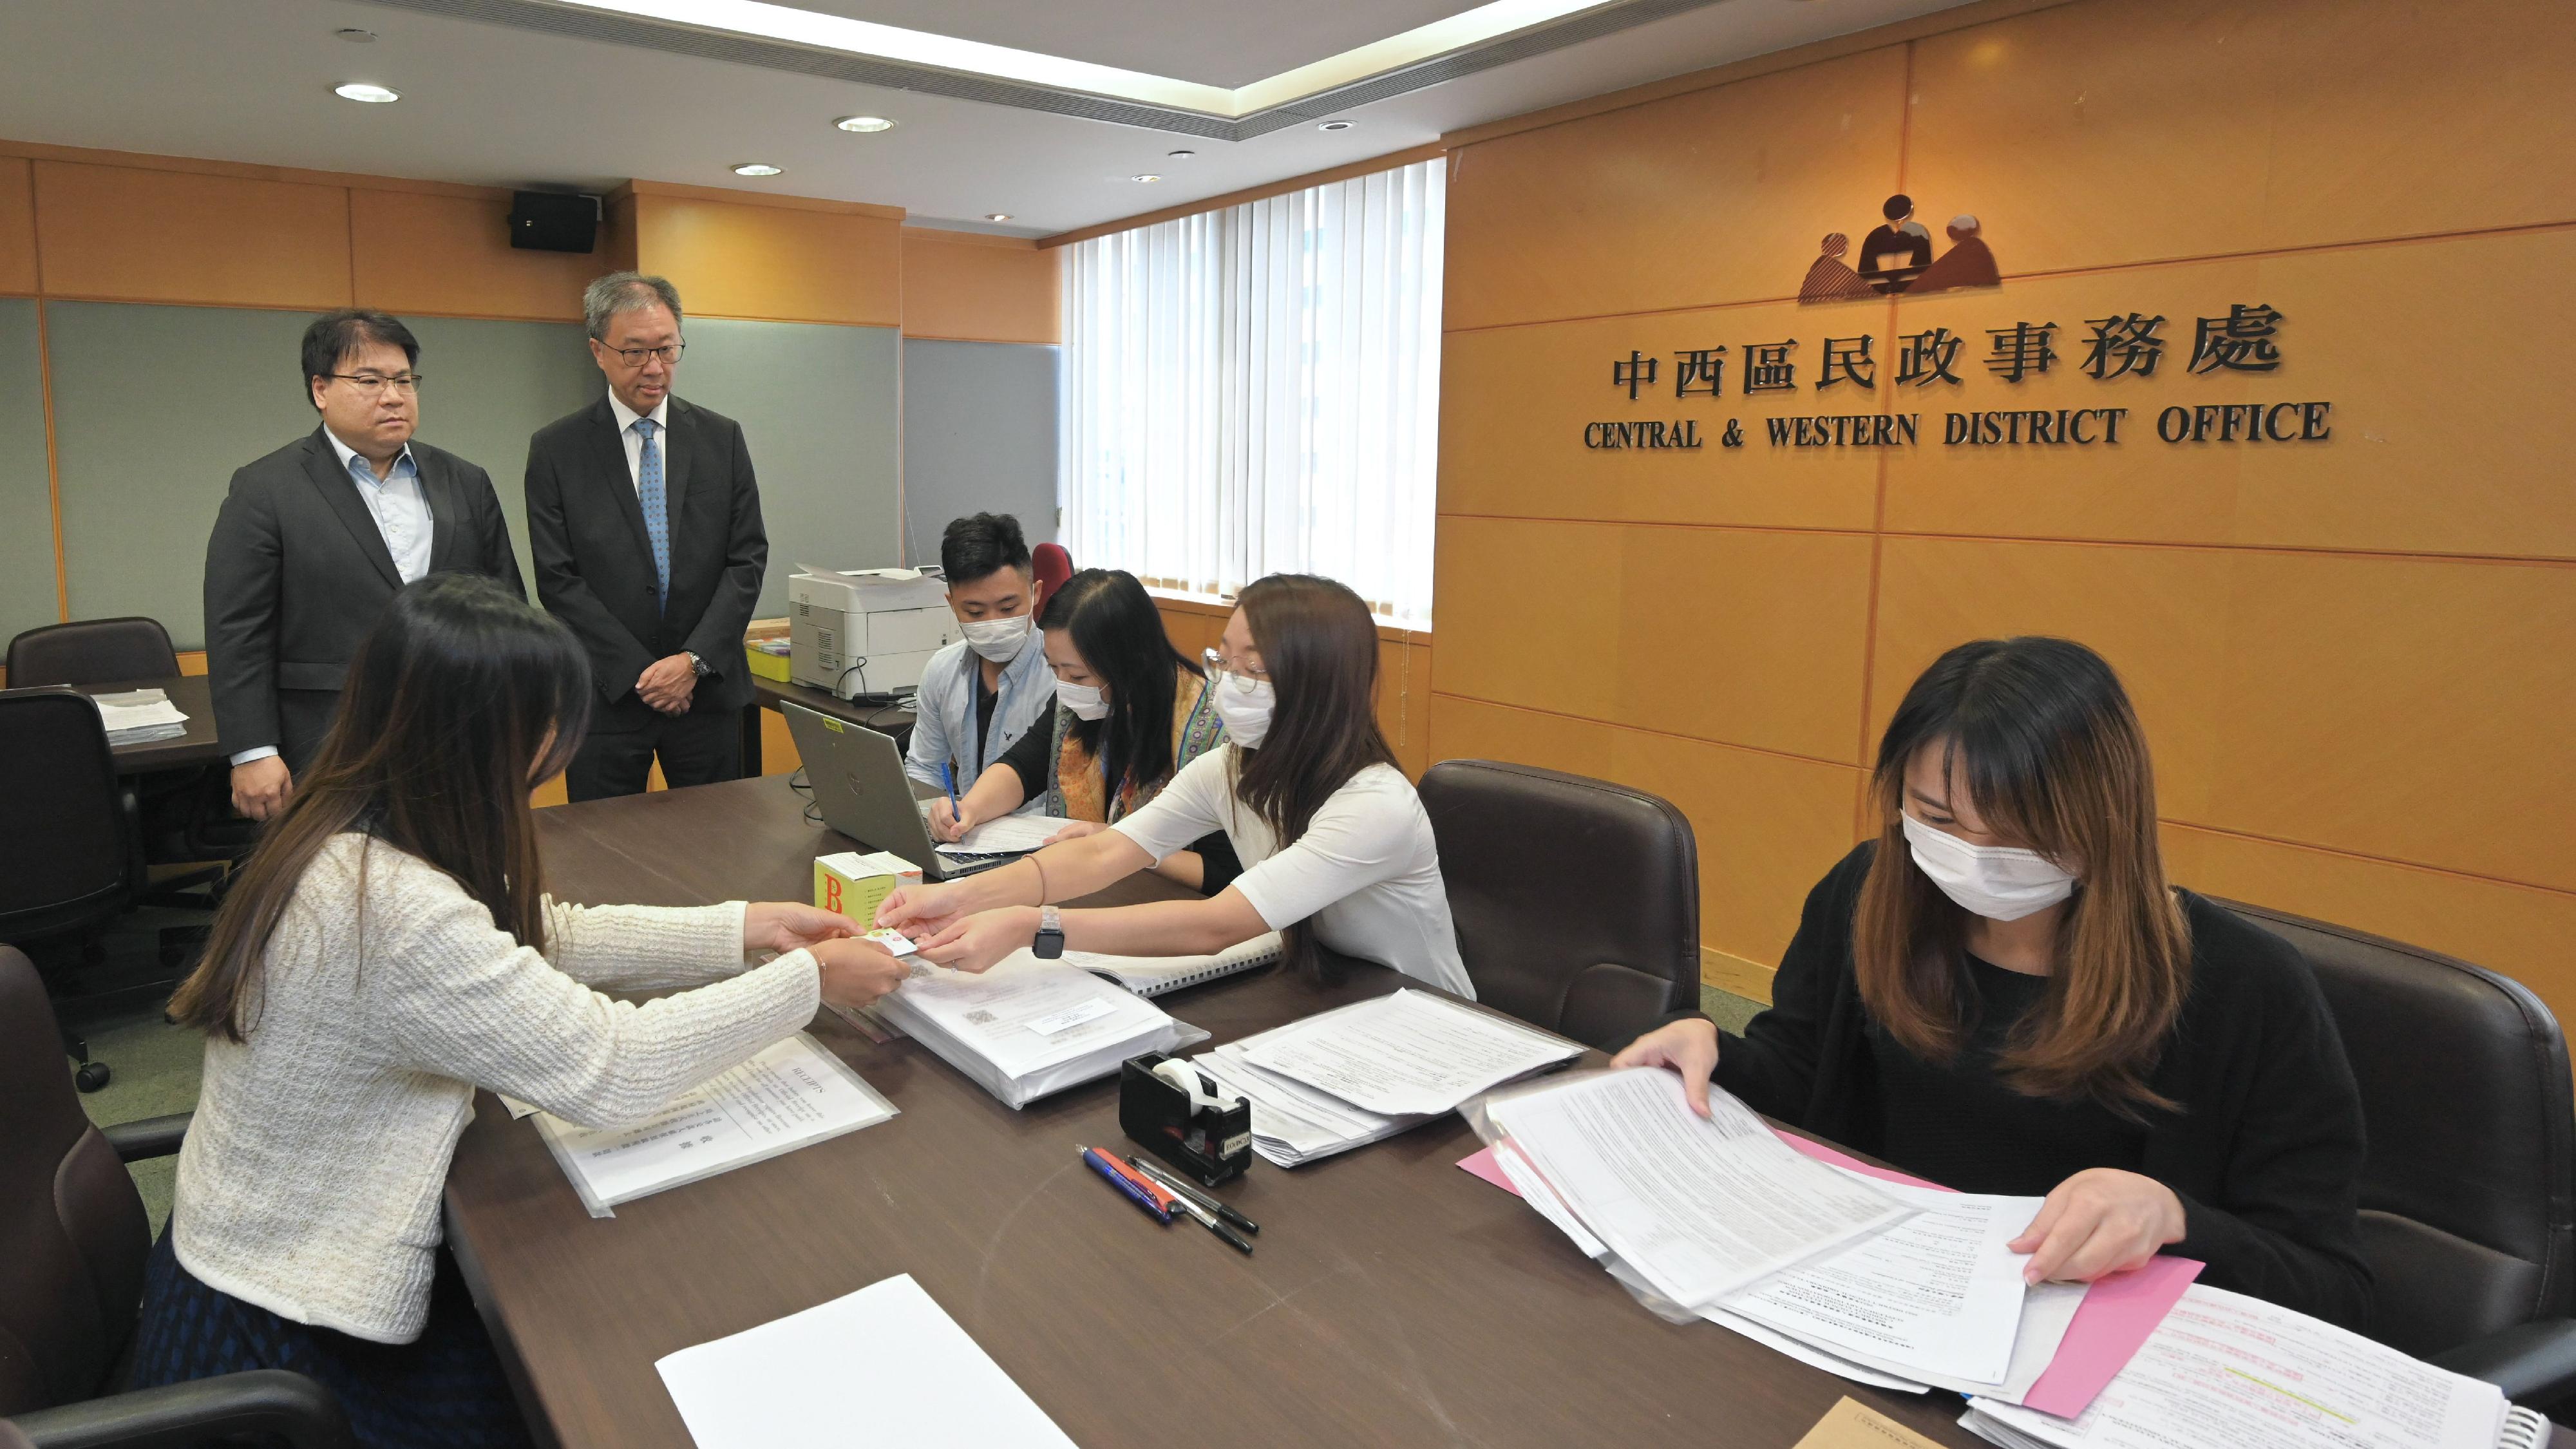 The Chairman of the Election Affairs Commission, Mr Justice David Lok (standing, right), today (October 16) visits the Returning Officer's office at the Central and Western District Office, where nomination forms for the 2023 District Council Ordinary Election will be received, to inspect the procedures for receiving nomination forms. Also present is the Returning Officer of the Central and Western District, Mr David Leung (standing, left).